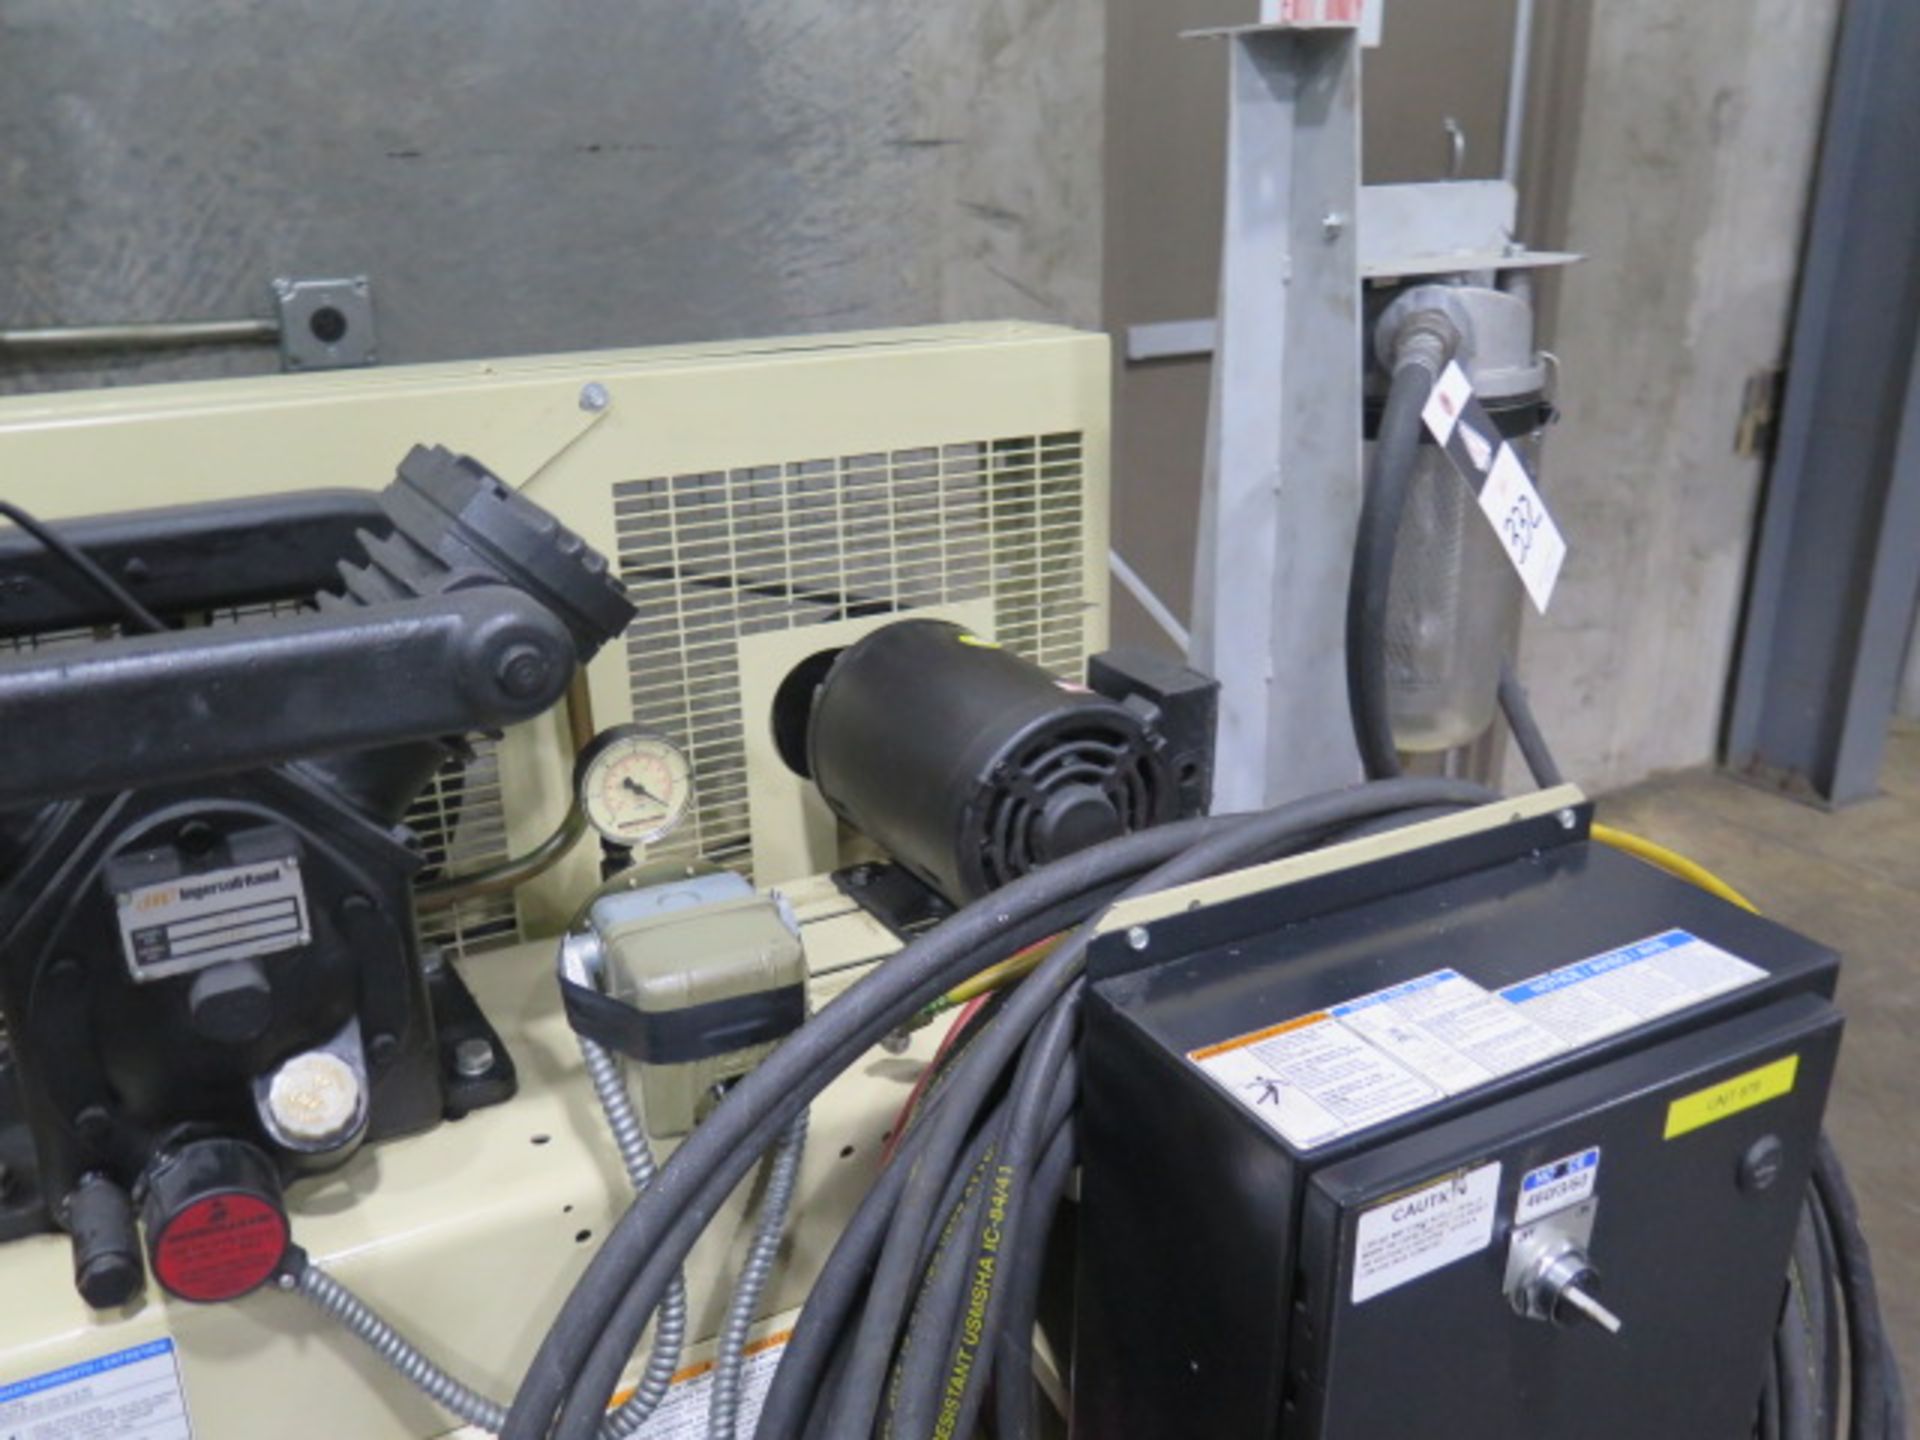 Ingersoll Rand V235D1.5 Vacuum Compressor s/n 0612150226 w/ 1.5Hp Motor, 80 Gallon Tank SOLD AS IS - Image 5 of 8